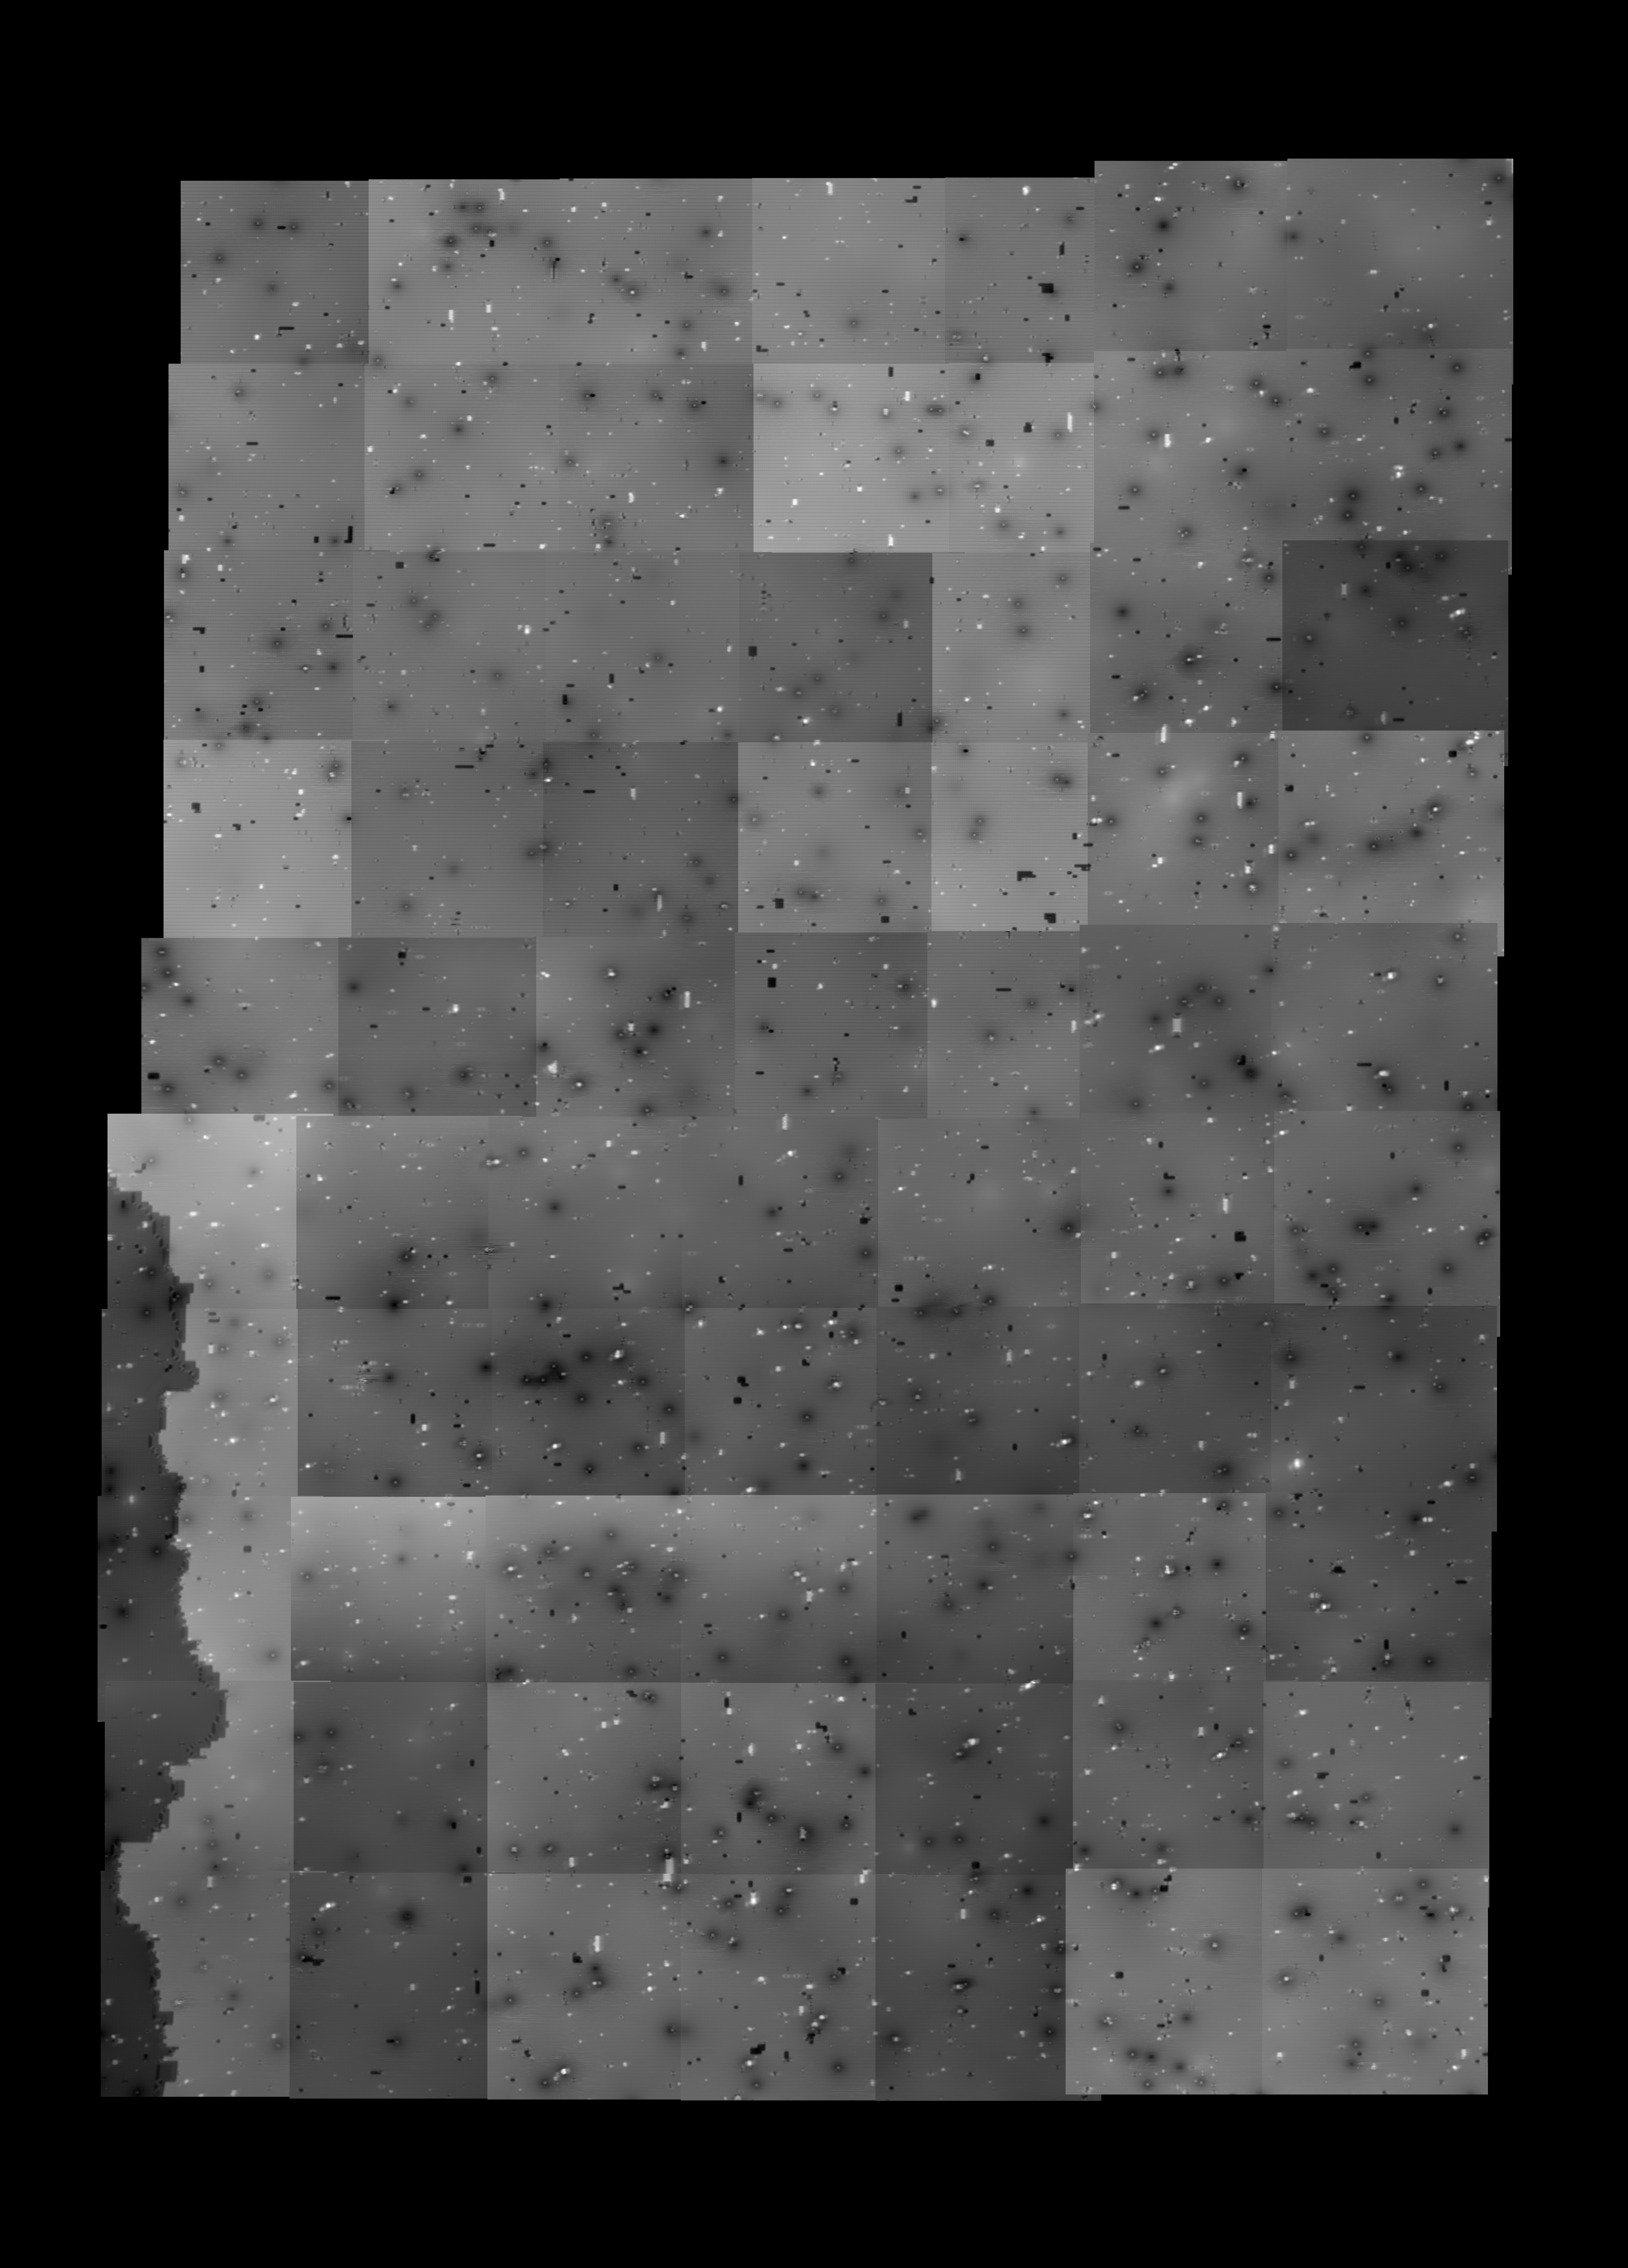 Stitched STM surface scan